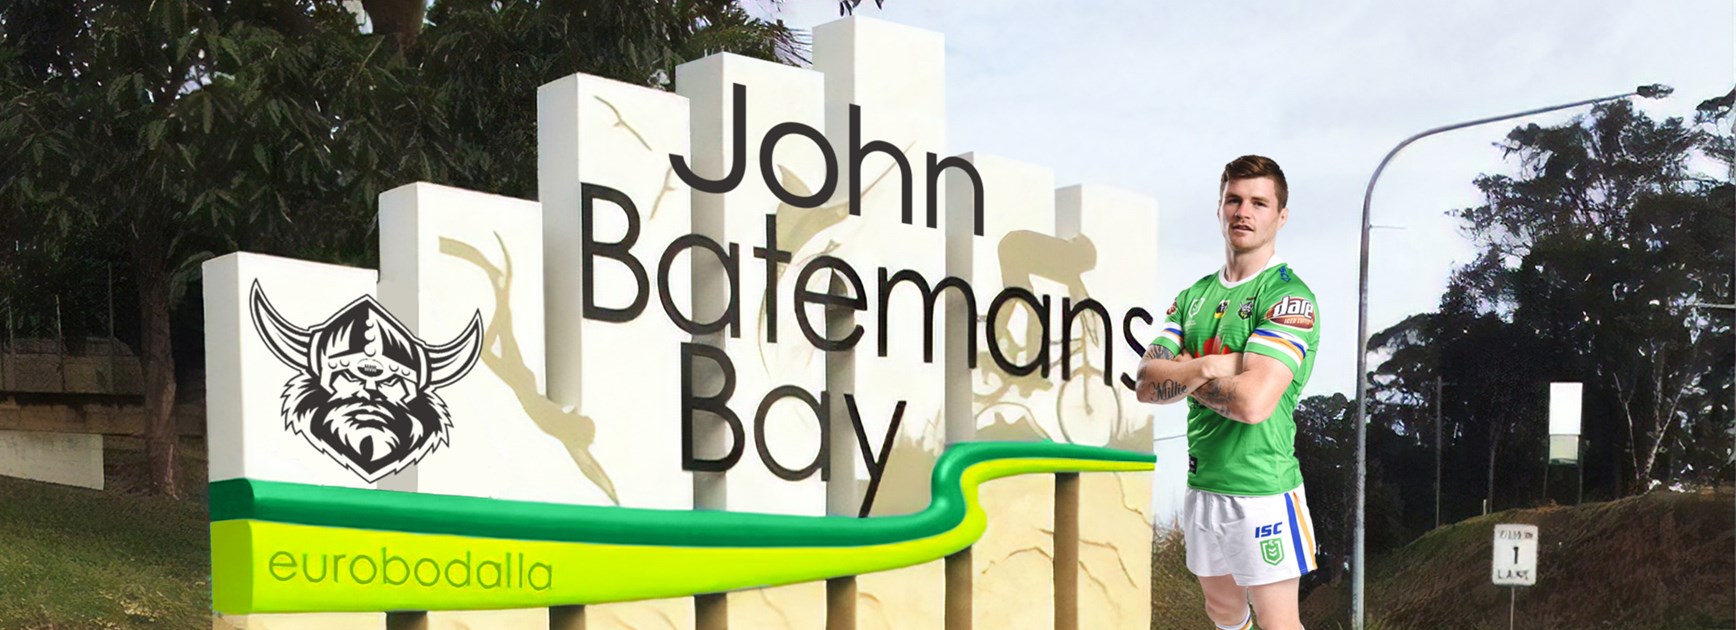 John Bateman's Bay: Online petition calls for town to be renamed